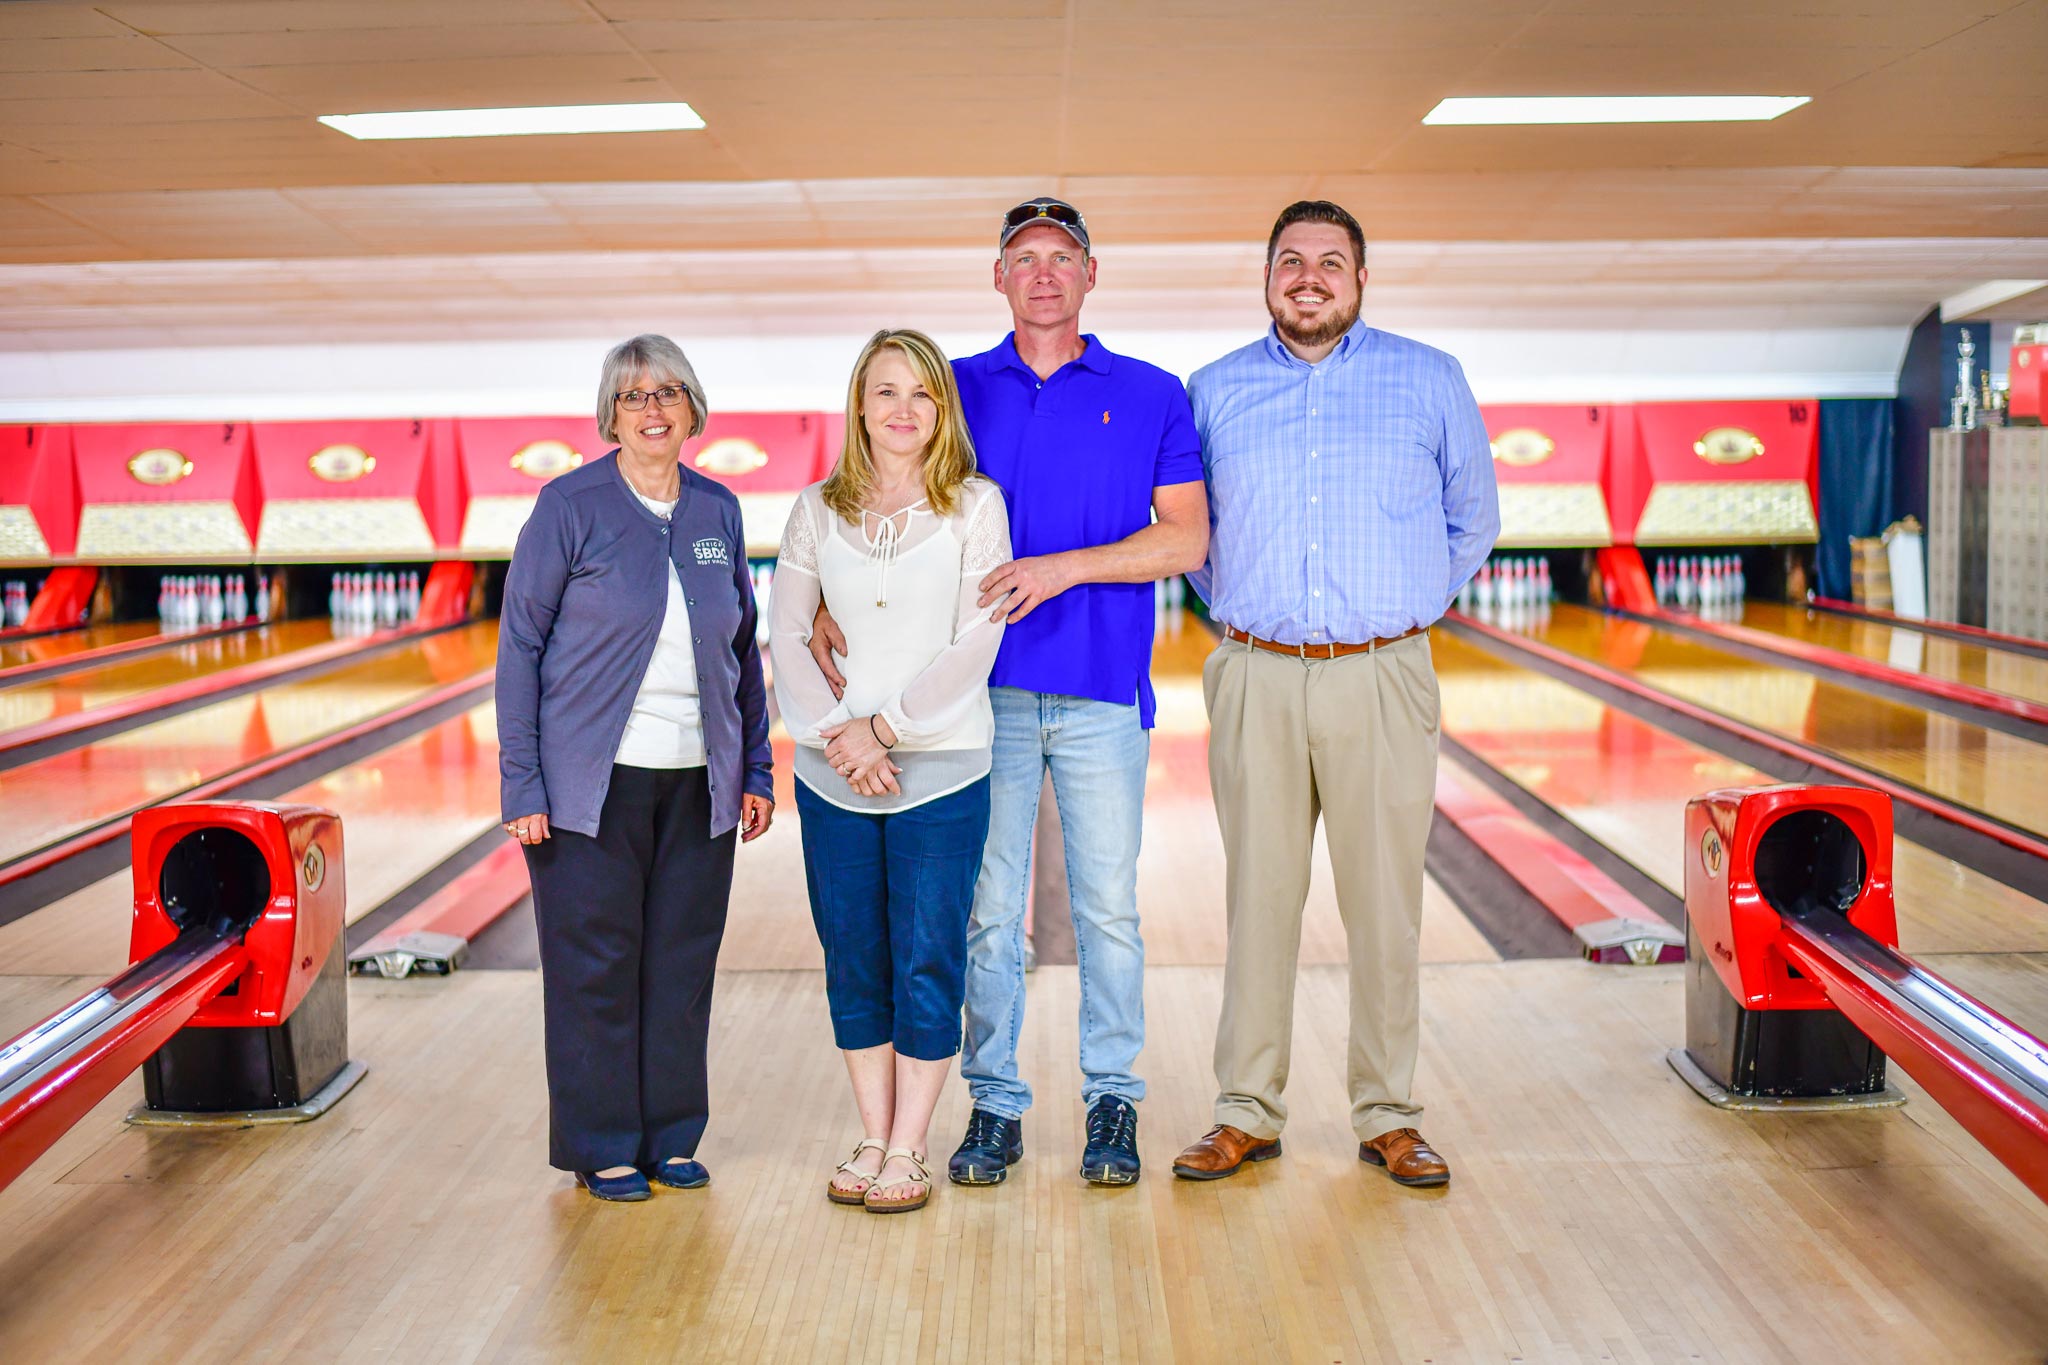 Iconic community bowling alley blends retro charm and tech advances under new owners